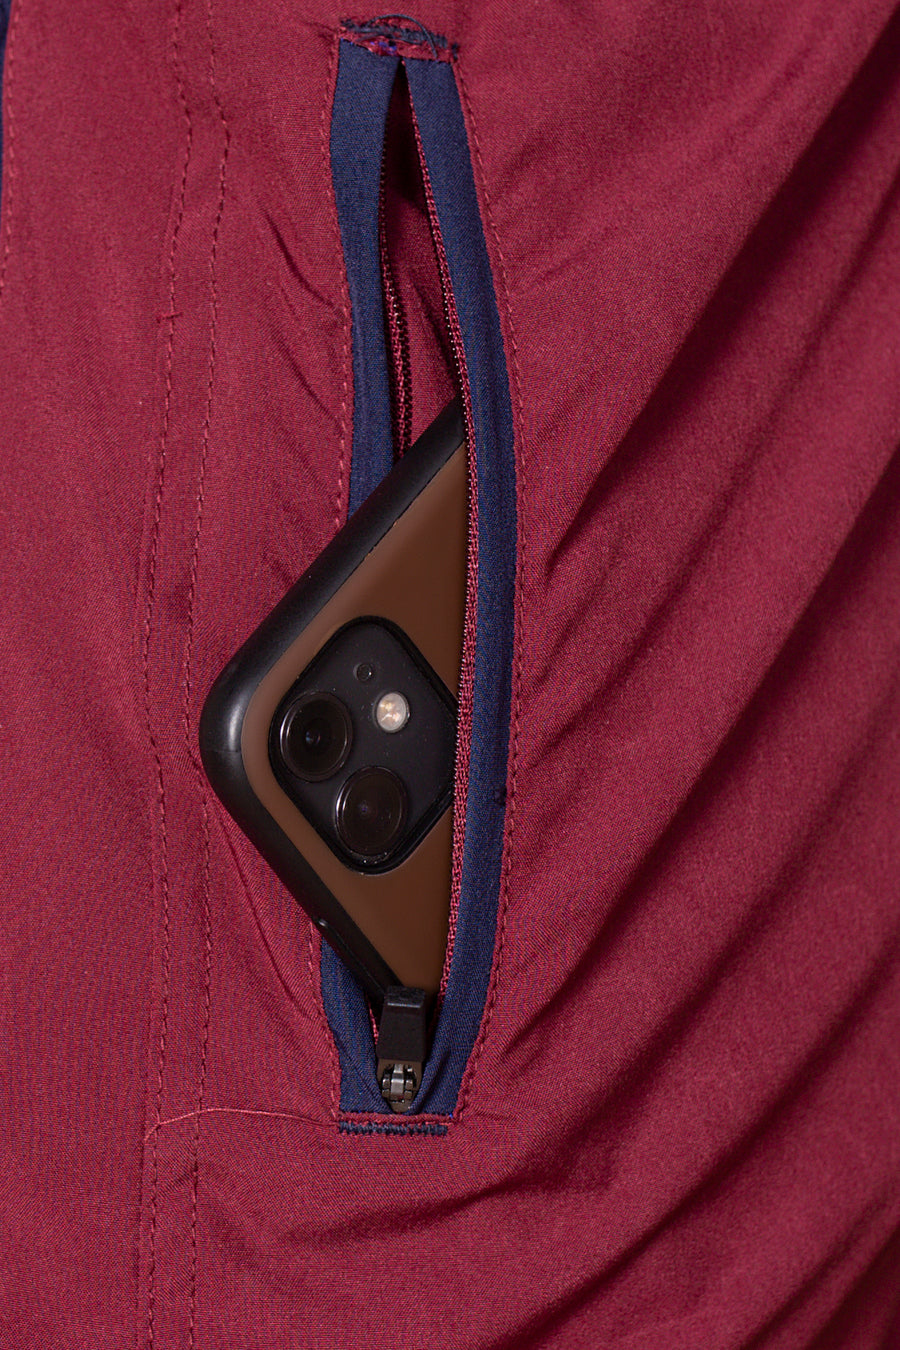 Men's Flight Shorts in Maroon | VOLO Apparel | Designed so you can feel fly and completely secure, the Flight Shorts 2.0 are made with an ultralight micro stretch fabric that is quick drying and comes with a three zipper pocket design. The smart pocket tech makes it so your stuff won’t bounce when you do. Reinforced stitching so it can handle everything you will throw at it. The one short for your every adventure.